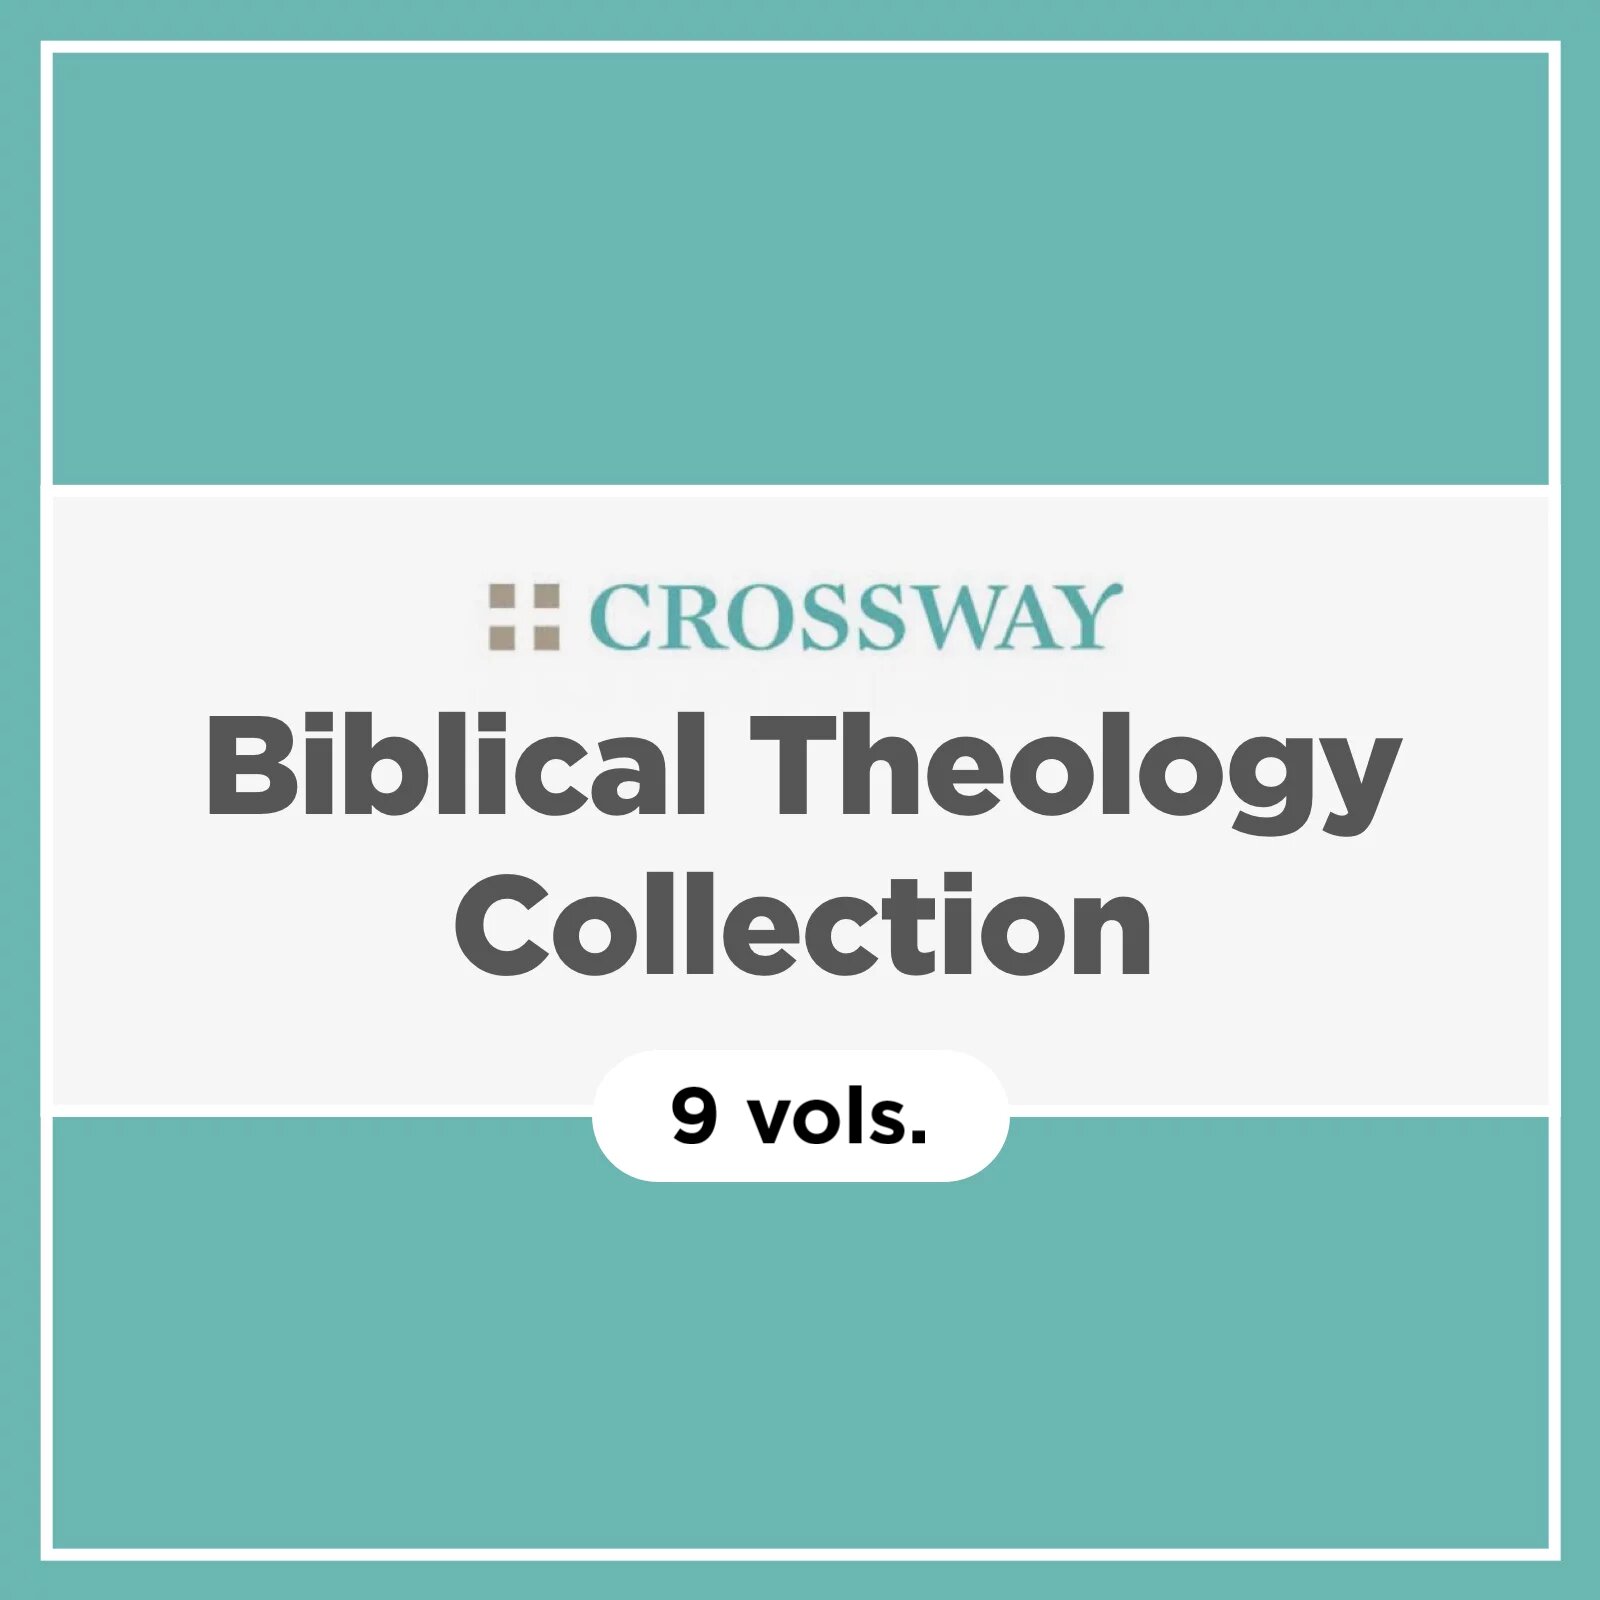 Crossway Biblical Theology Collection (9 vols.)